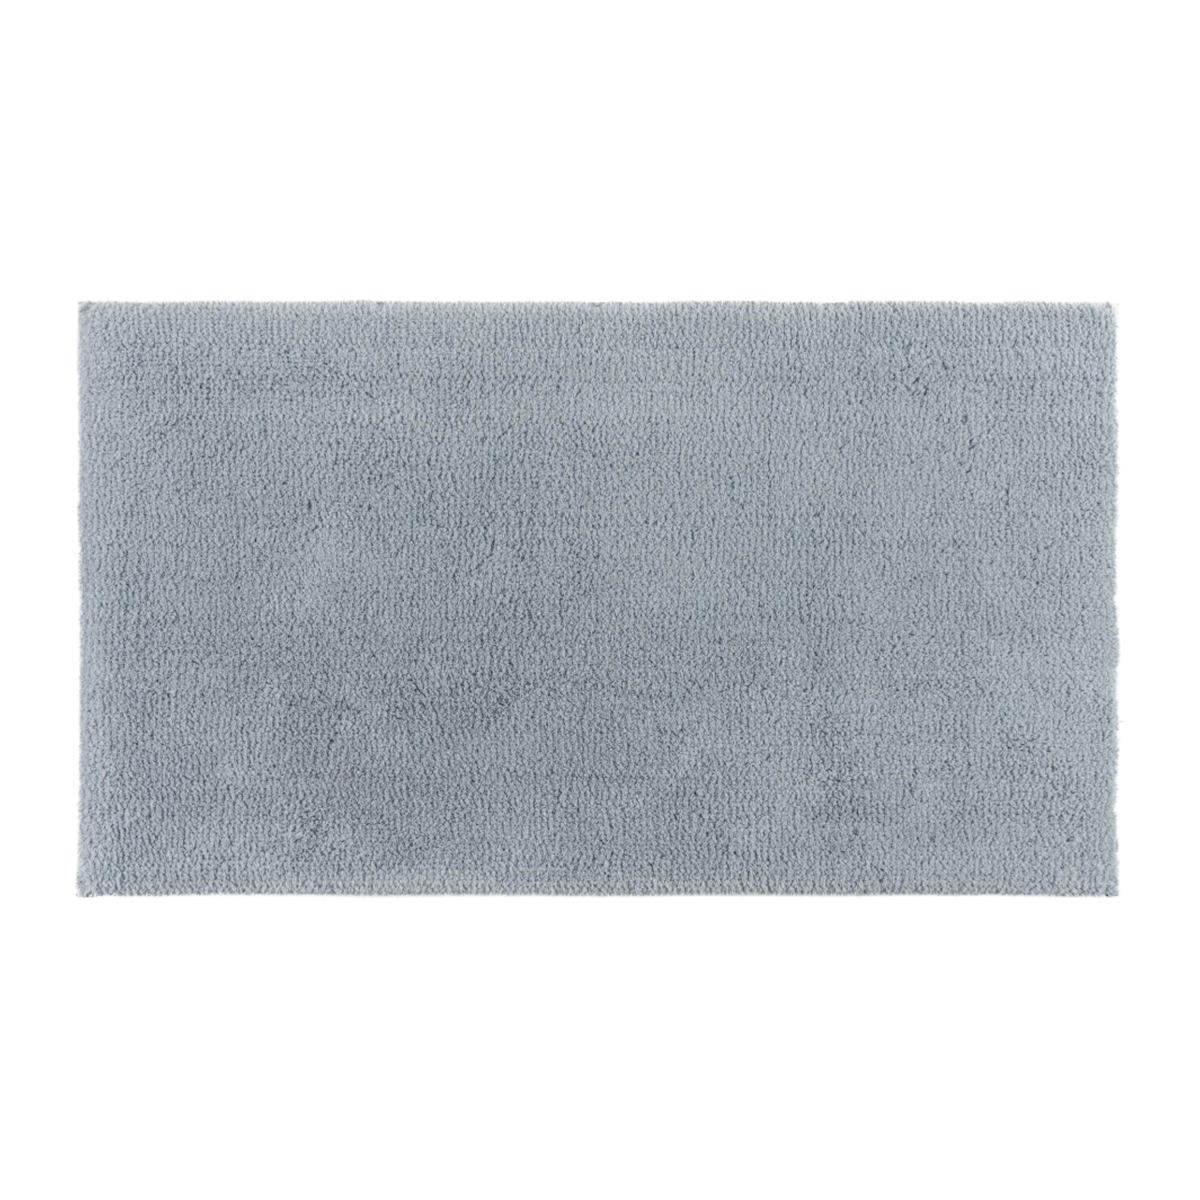 Graccioza Cool Bath Rugs French Blue Against a White Background